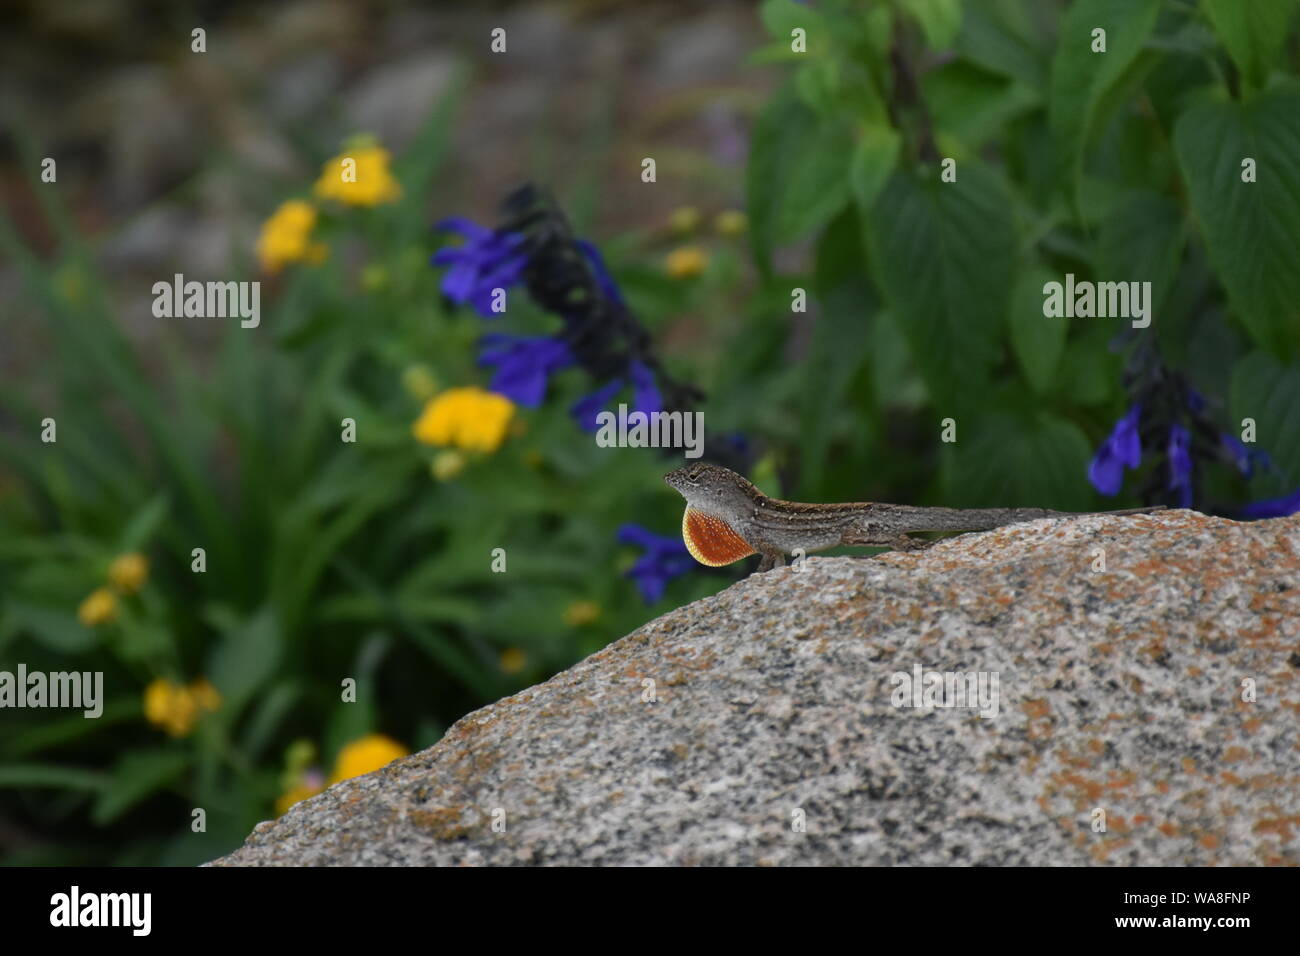 This is a wildlife picture of a Bahaman Anole which is commonly known as a Brown Anole. This is a very common little lizard in Florida. Chameleons. Stock Photo